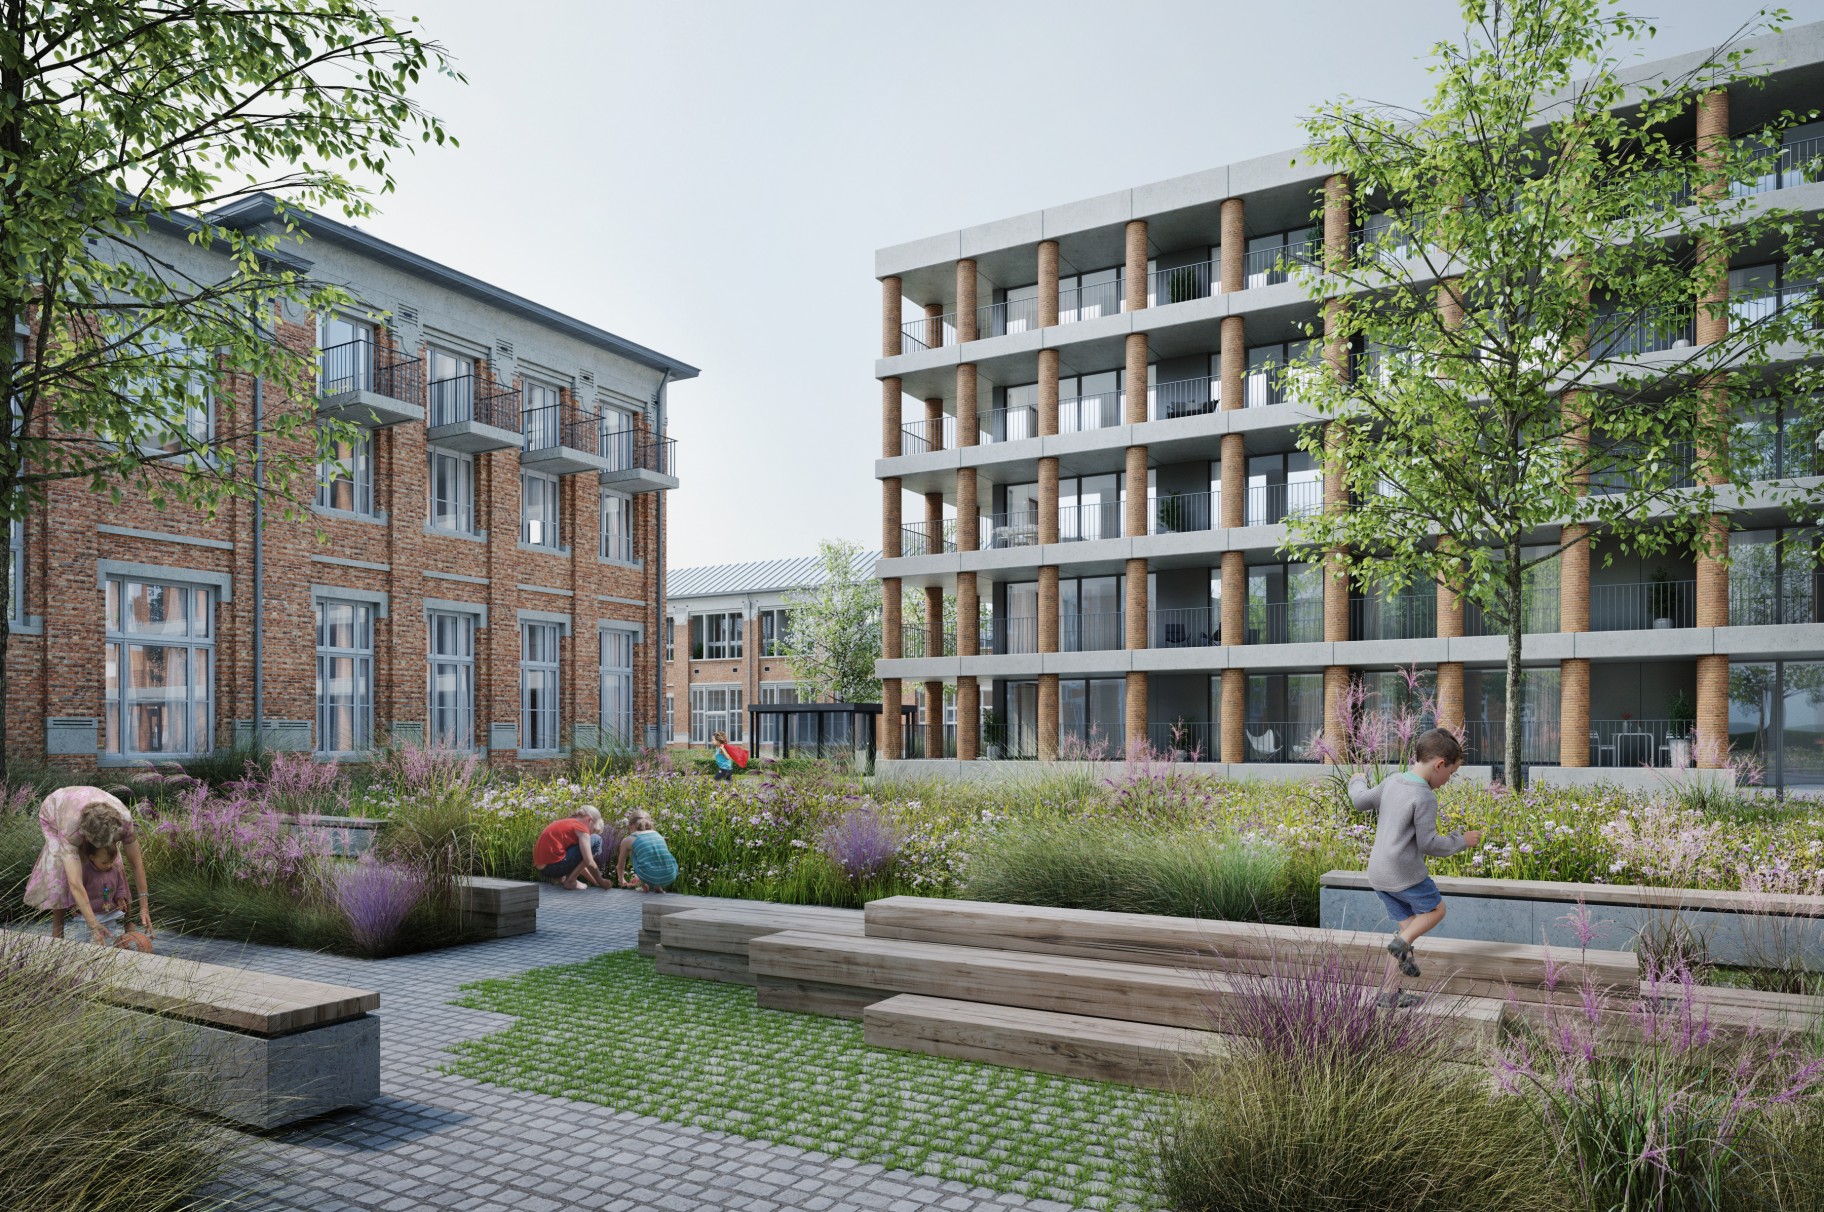 Vanhaerents, META, BOB361, Callebaut and OKRA win the competition for the re-purposing of the Normaalschool site in Lier